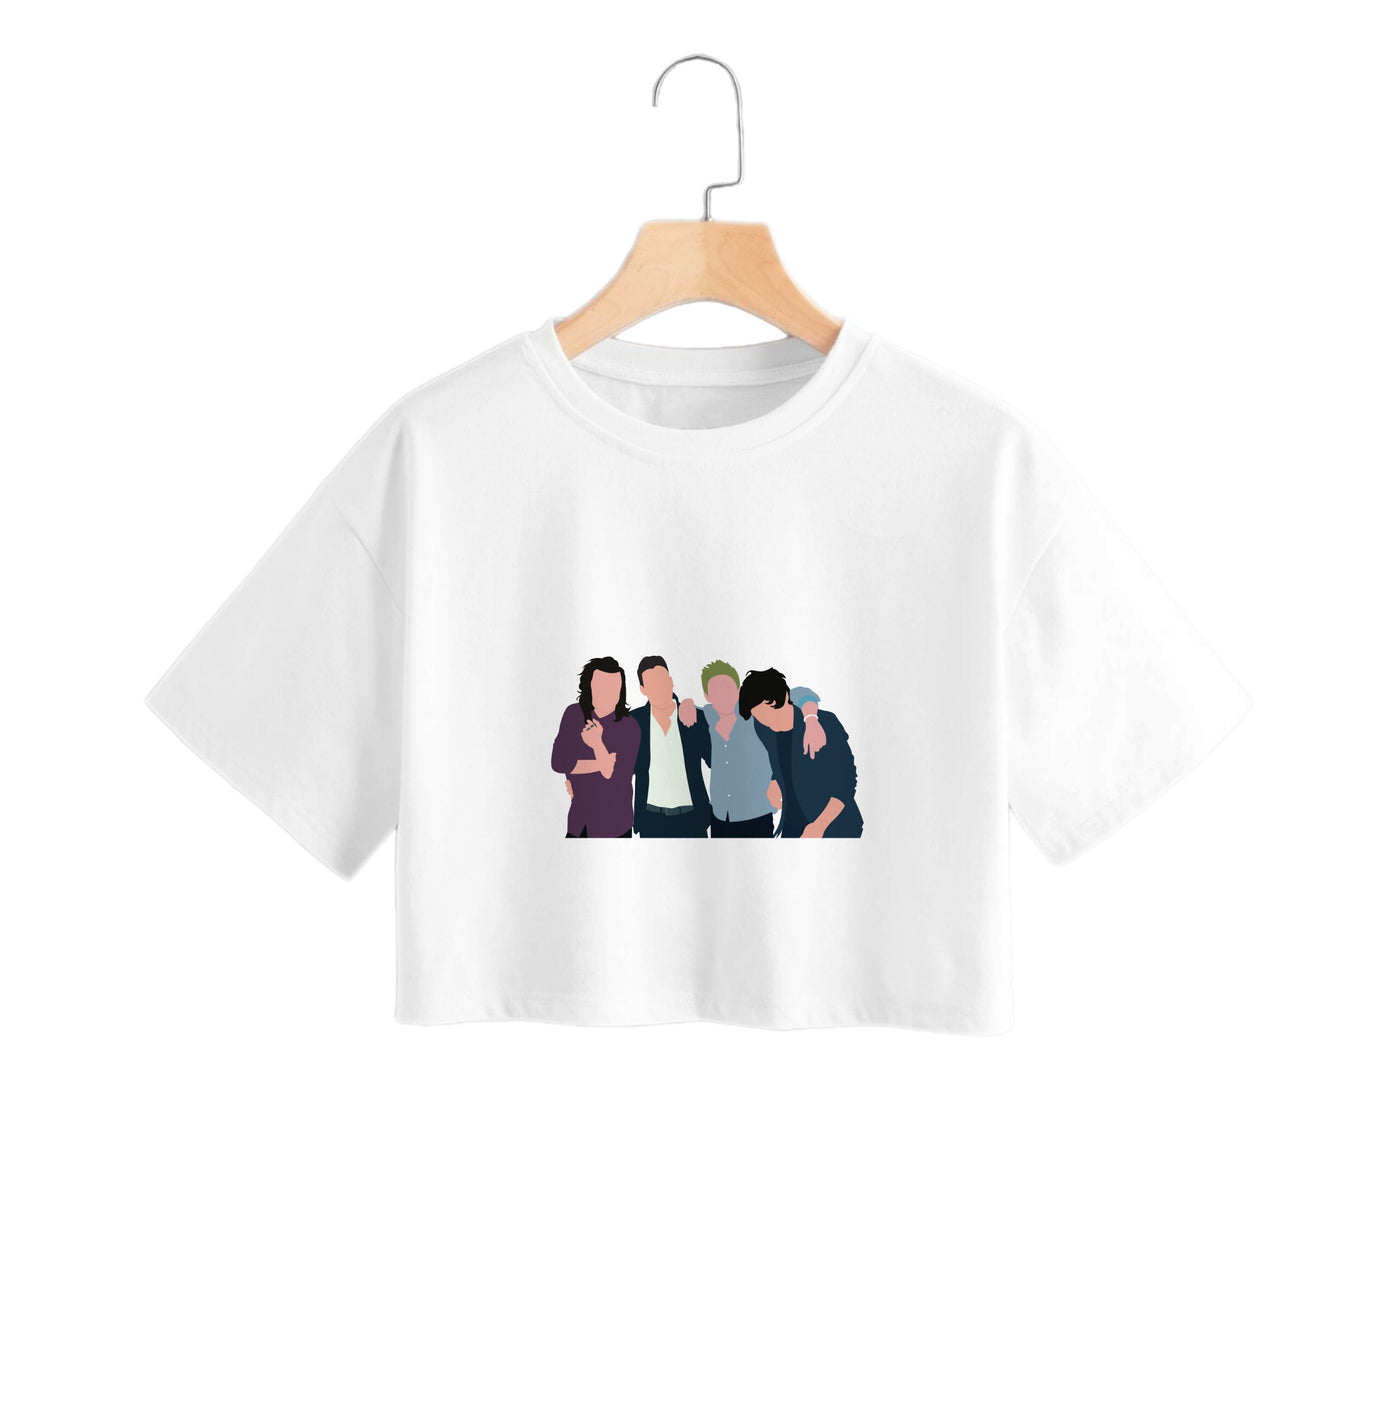 The 4 - One Direction  Crop Top